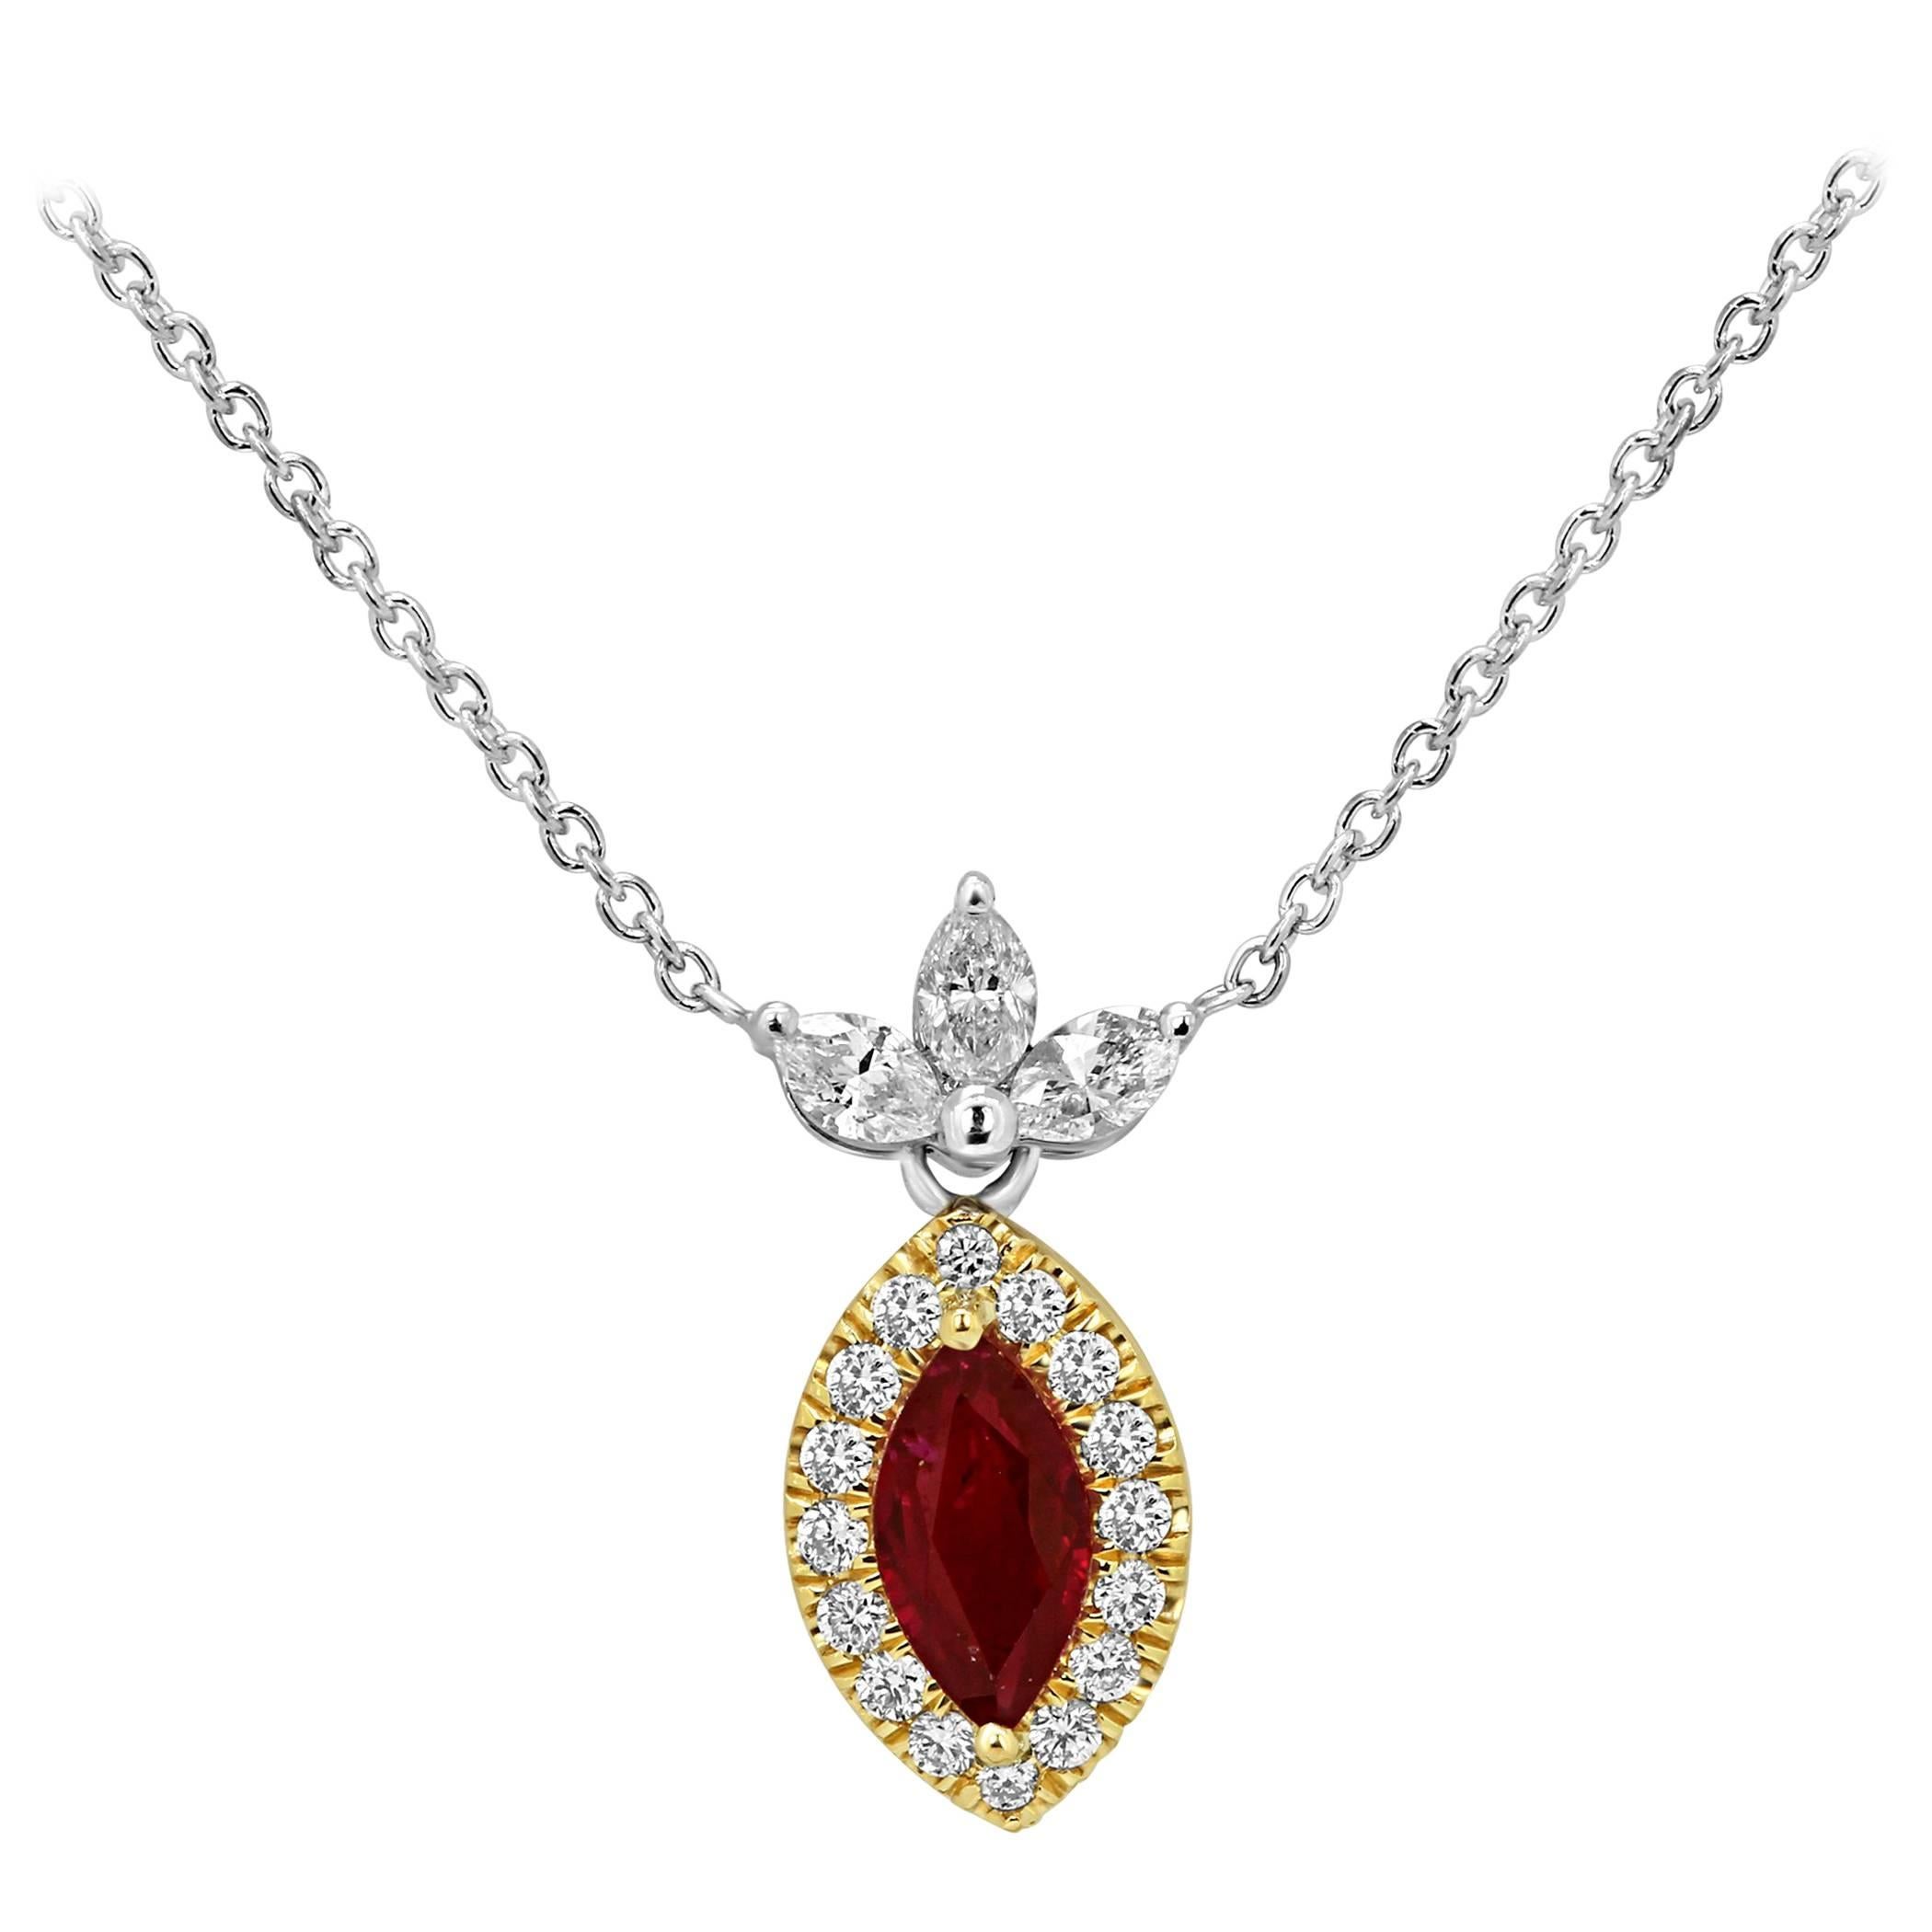 Stunning Ruby Marquise 0.86 Carat encircled in a single Halo of white round diamonds 0.22 carat with 3 White Diamond Marquise 0.22 Carat on top in 18K White and Yellow Gold Necklace.
Matching Ear Ring Sold Separately on 1stdibs.

MADE IN USA
Total